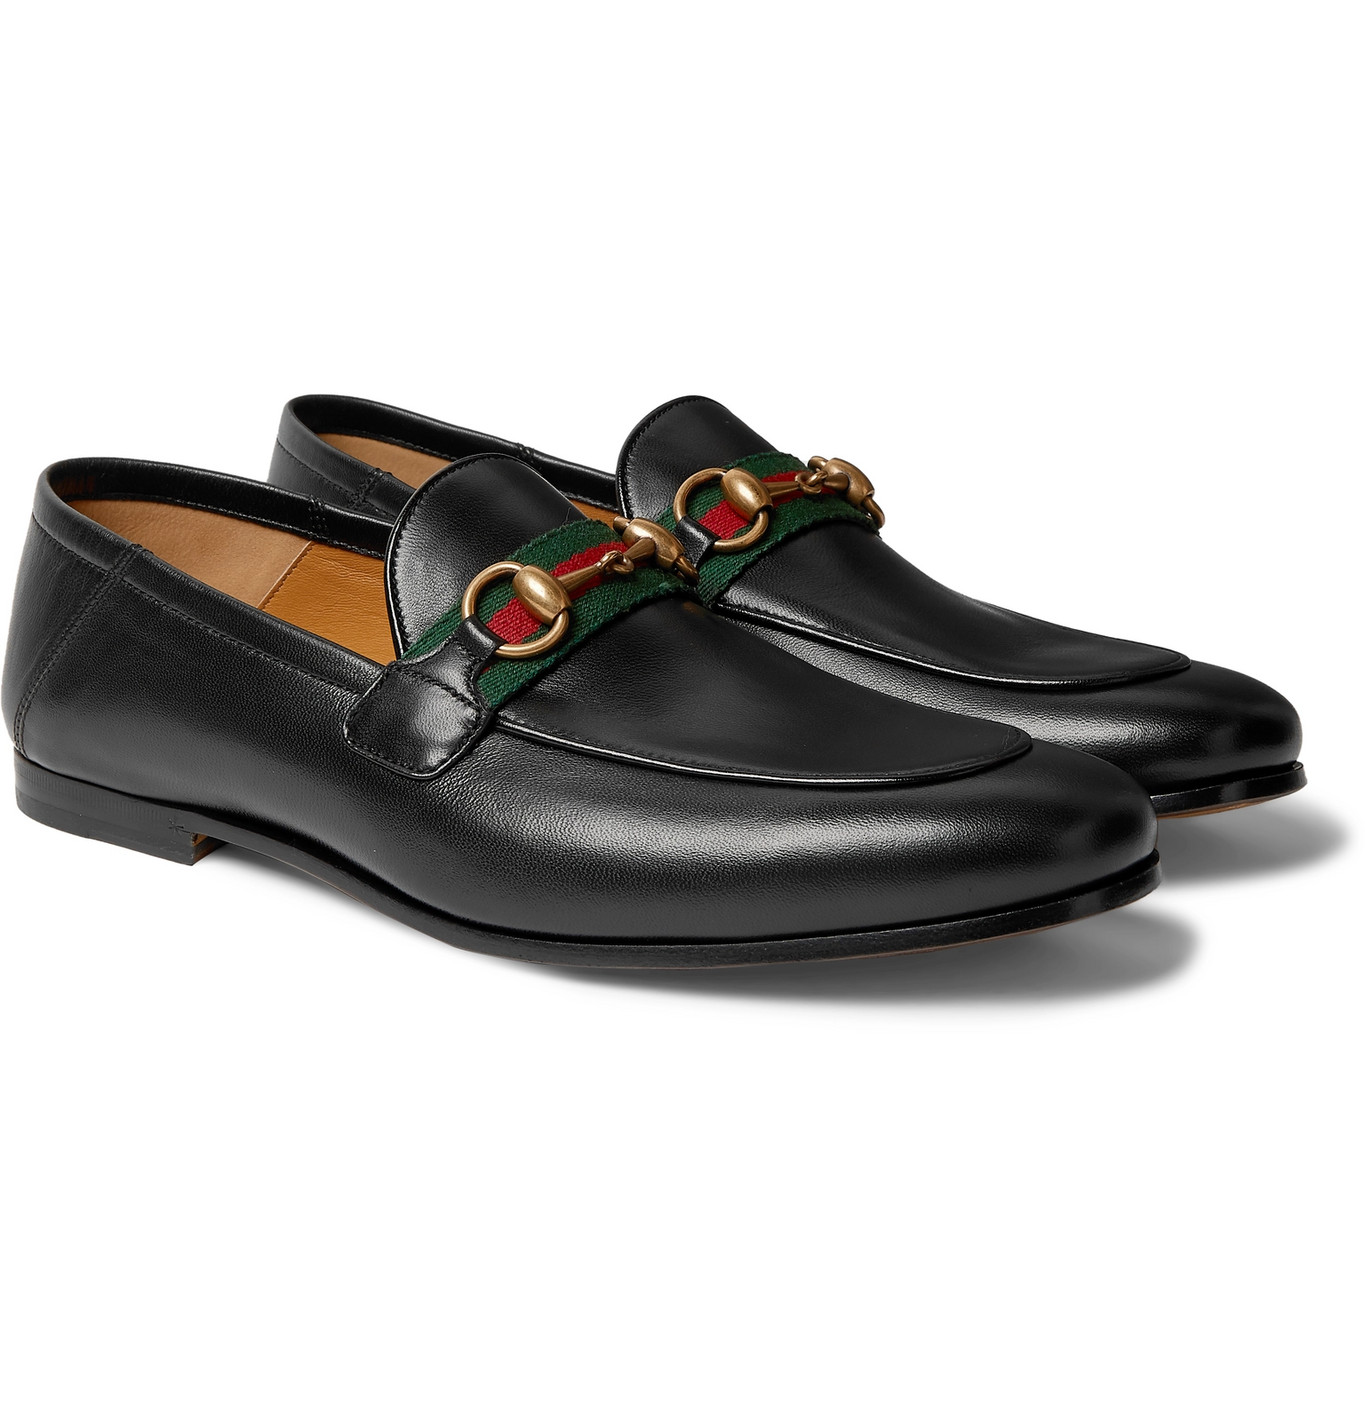 Gucci - Brixton Webbing-Trimmed Horsebit Collapsible-Heel Leather ...